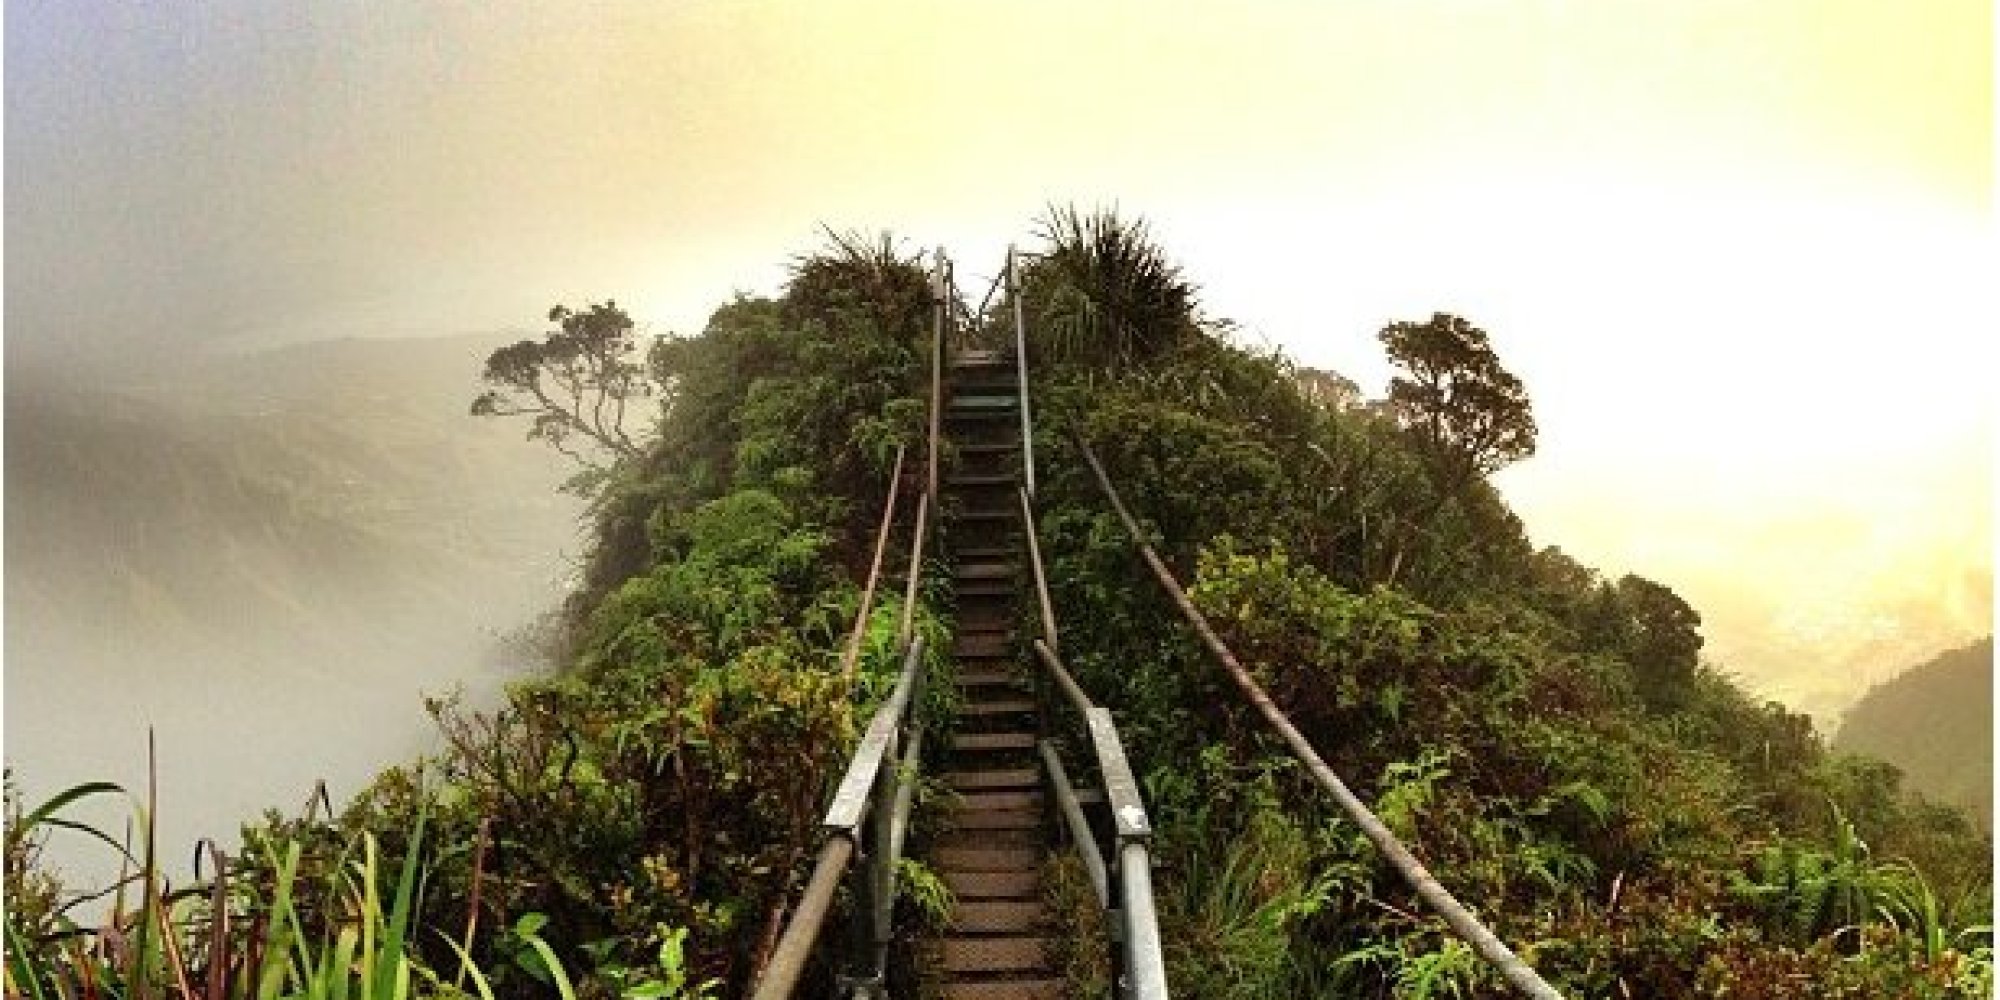 Jungle Stairs Overlooking Mountains and Sunset